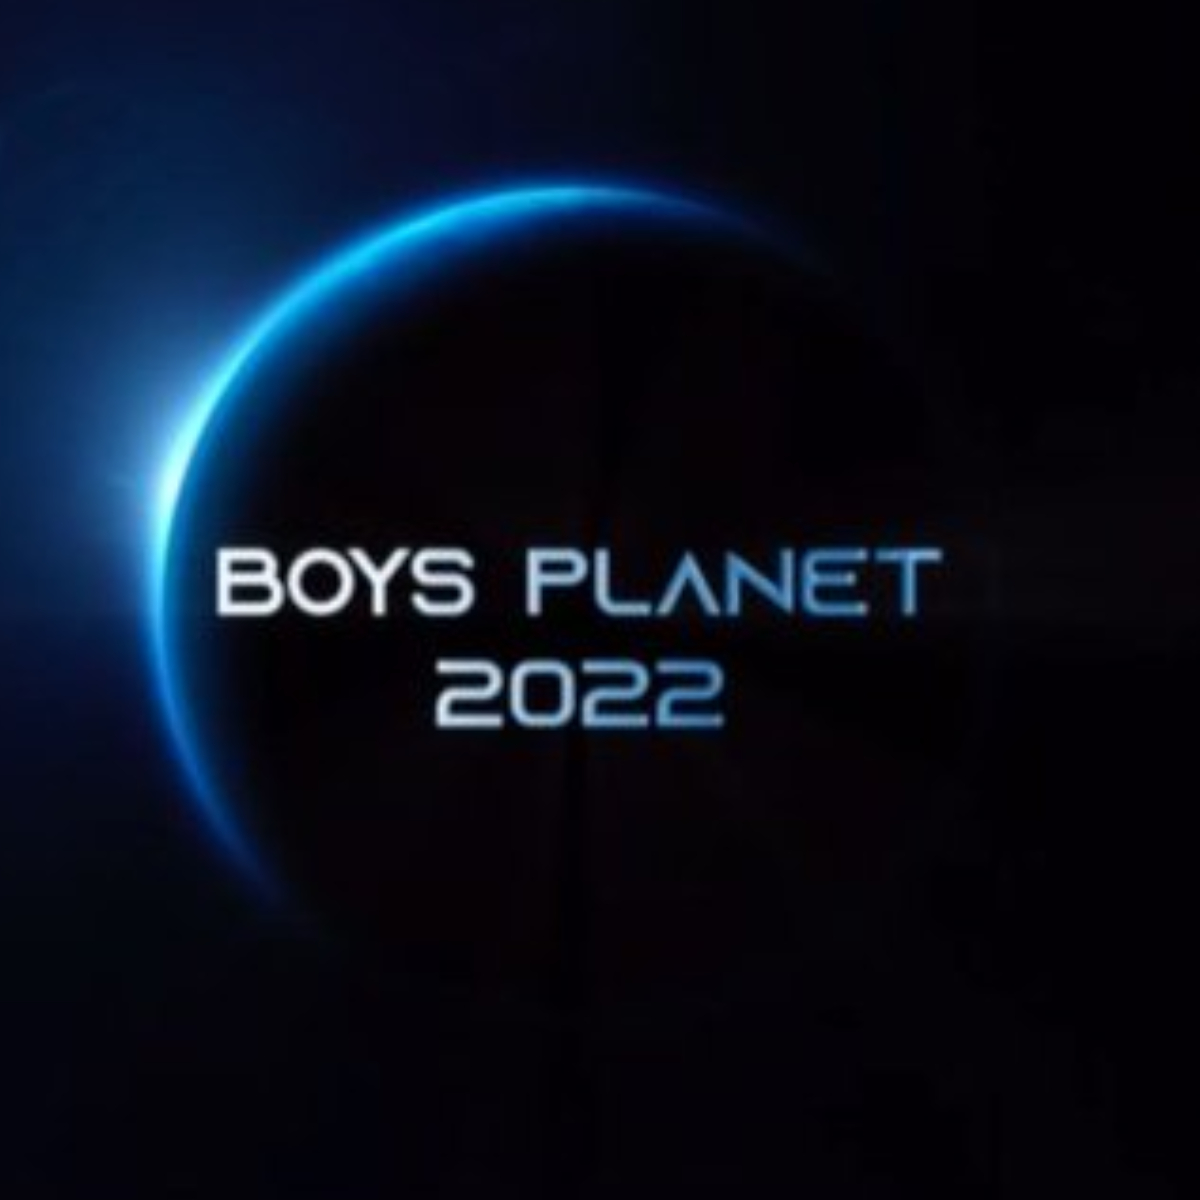 Mnet announces 'Boys Planet 2022' at the 2021 MAMA 